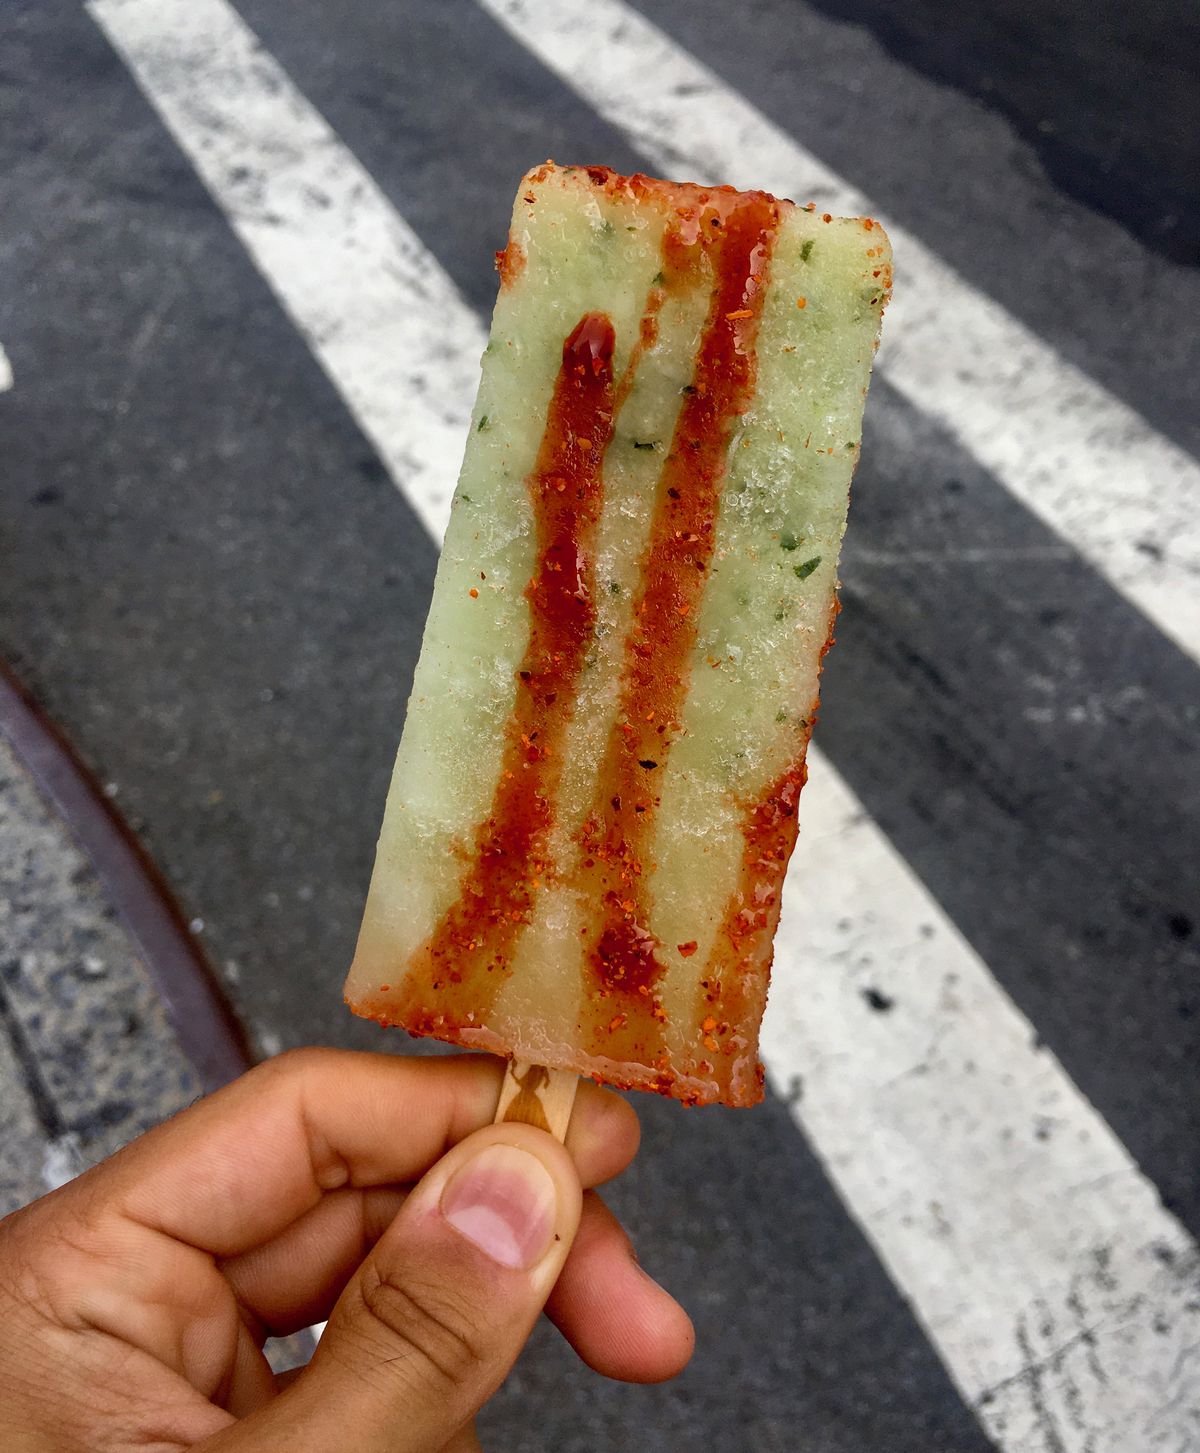 A cucumber lime frozen popsicle is covered in hot sauce and chile lime seasoning. In the background, a crosswalk is visible.